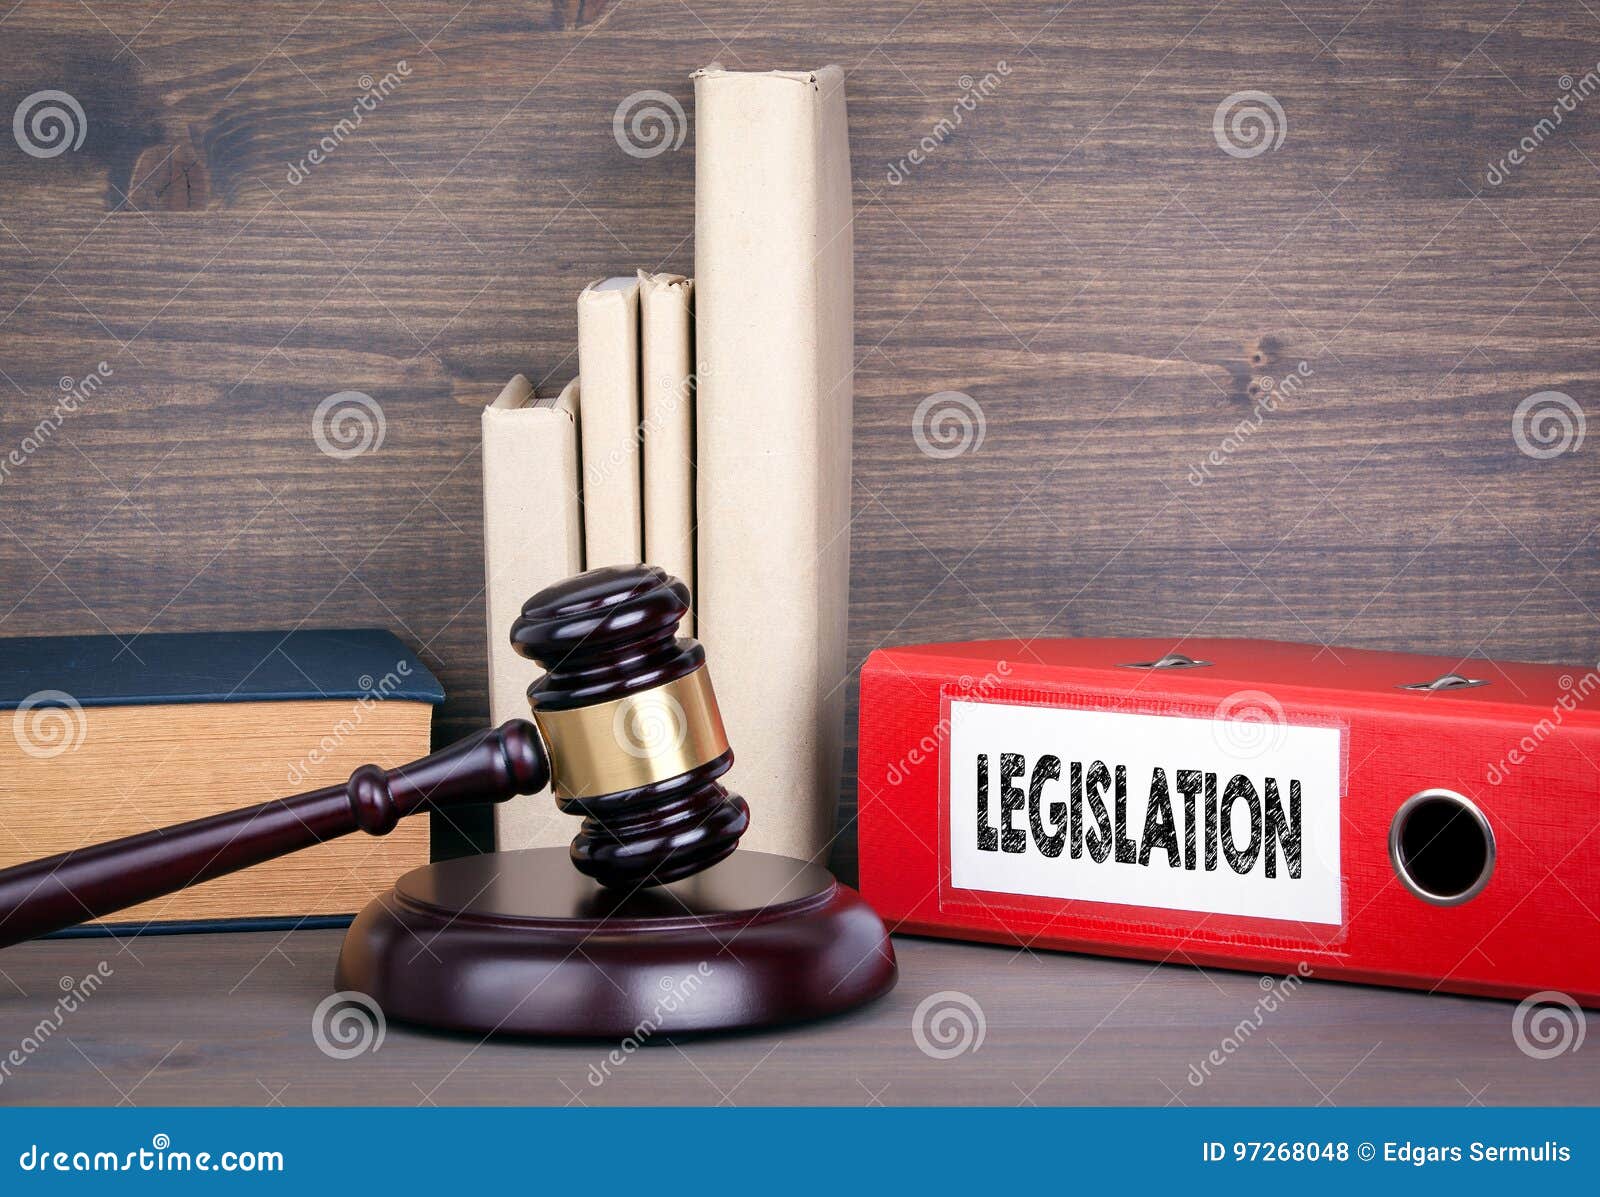 legislation. wooden gavel and books in background. law and justice concept